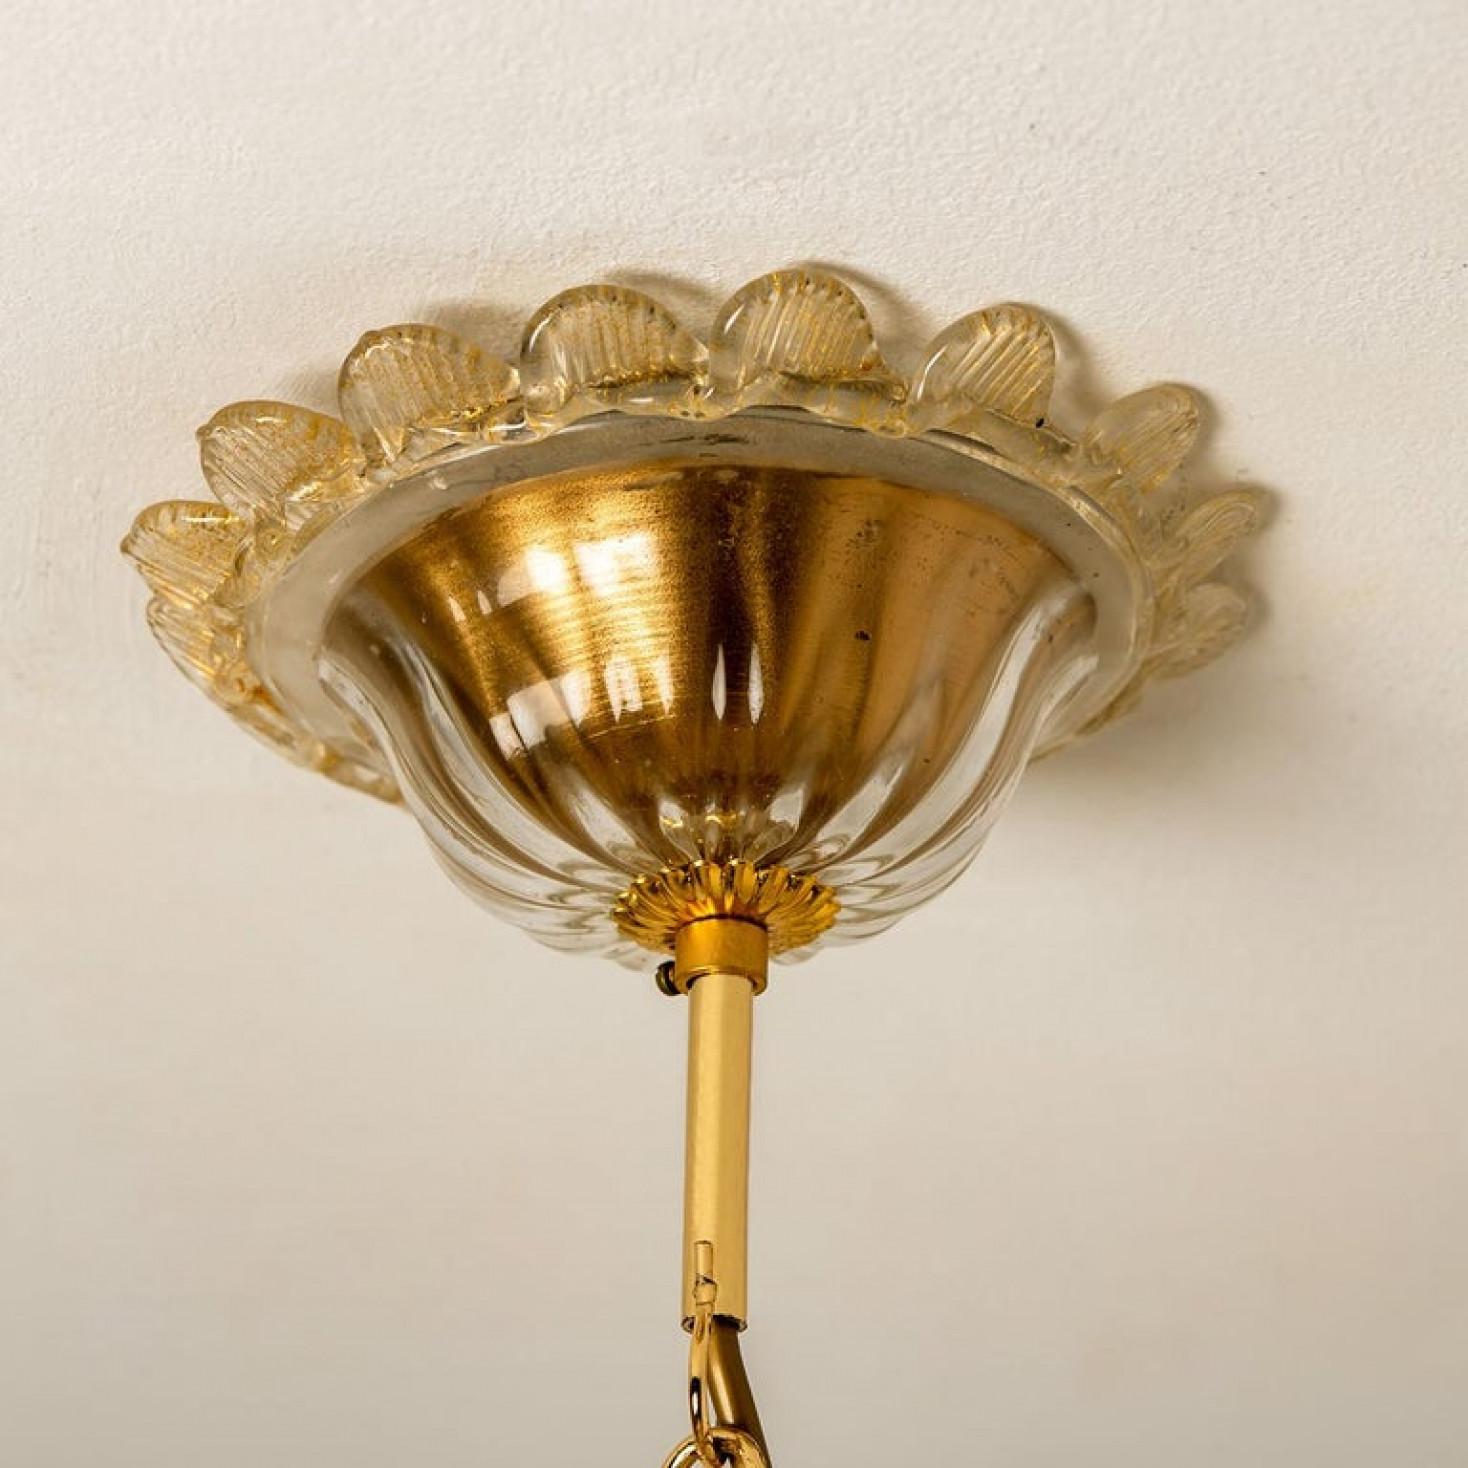 Splendid rich and elegant chandelier by Barovier with wonderful hand-blown Murano glass with amber colored inclusions.

An Absolut statement piece in any room. Real craftsmanship from the 20th century!

Measures: Diameter 30